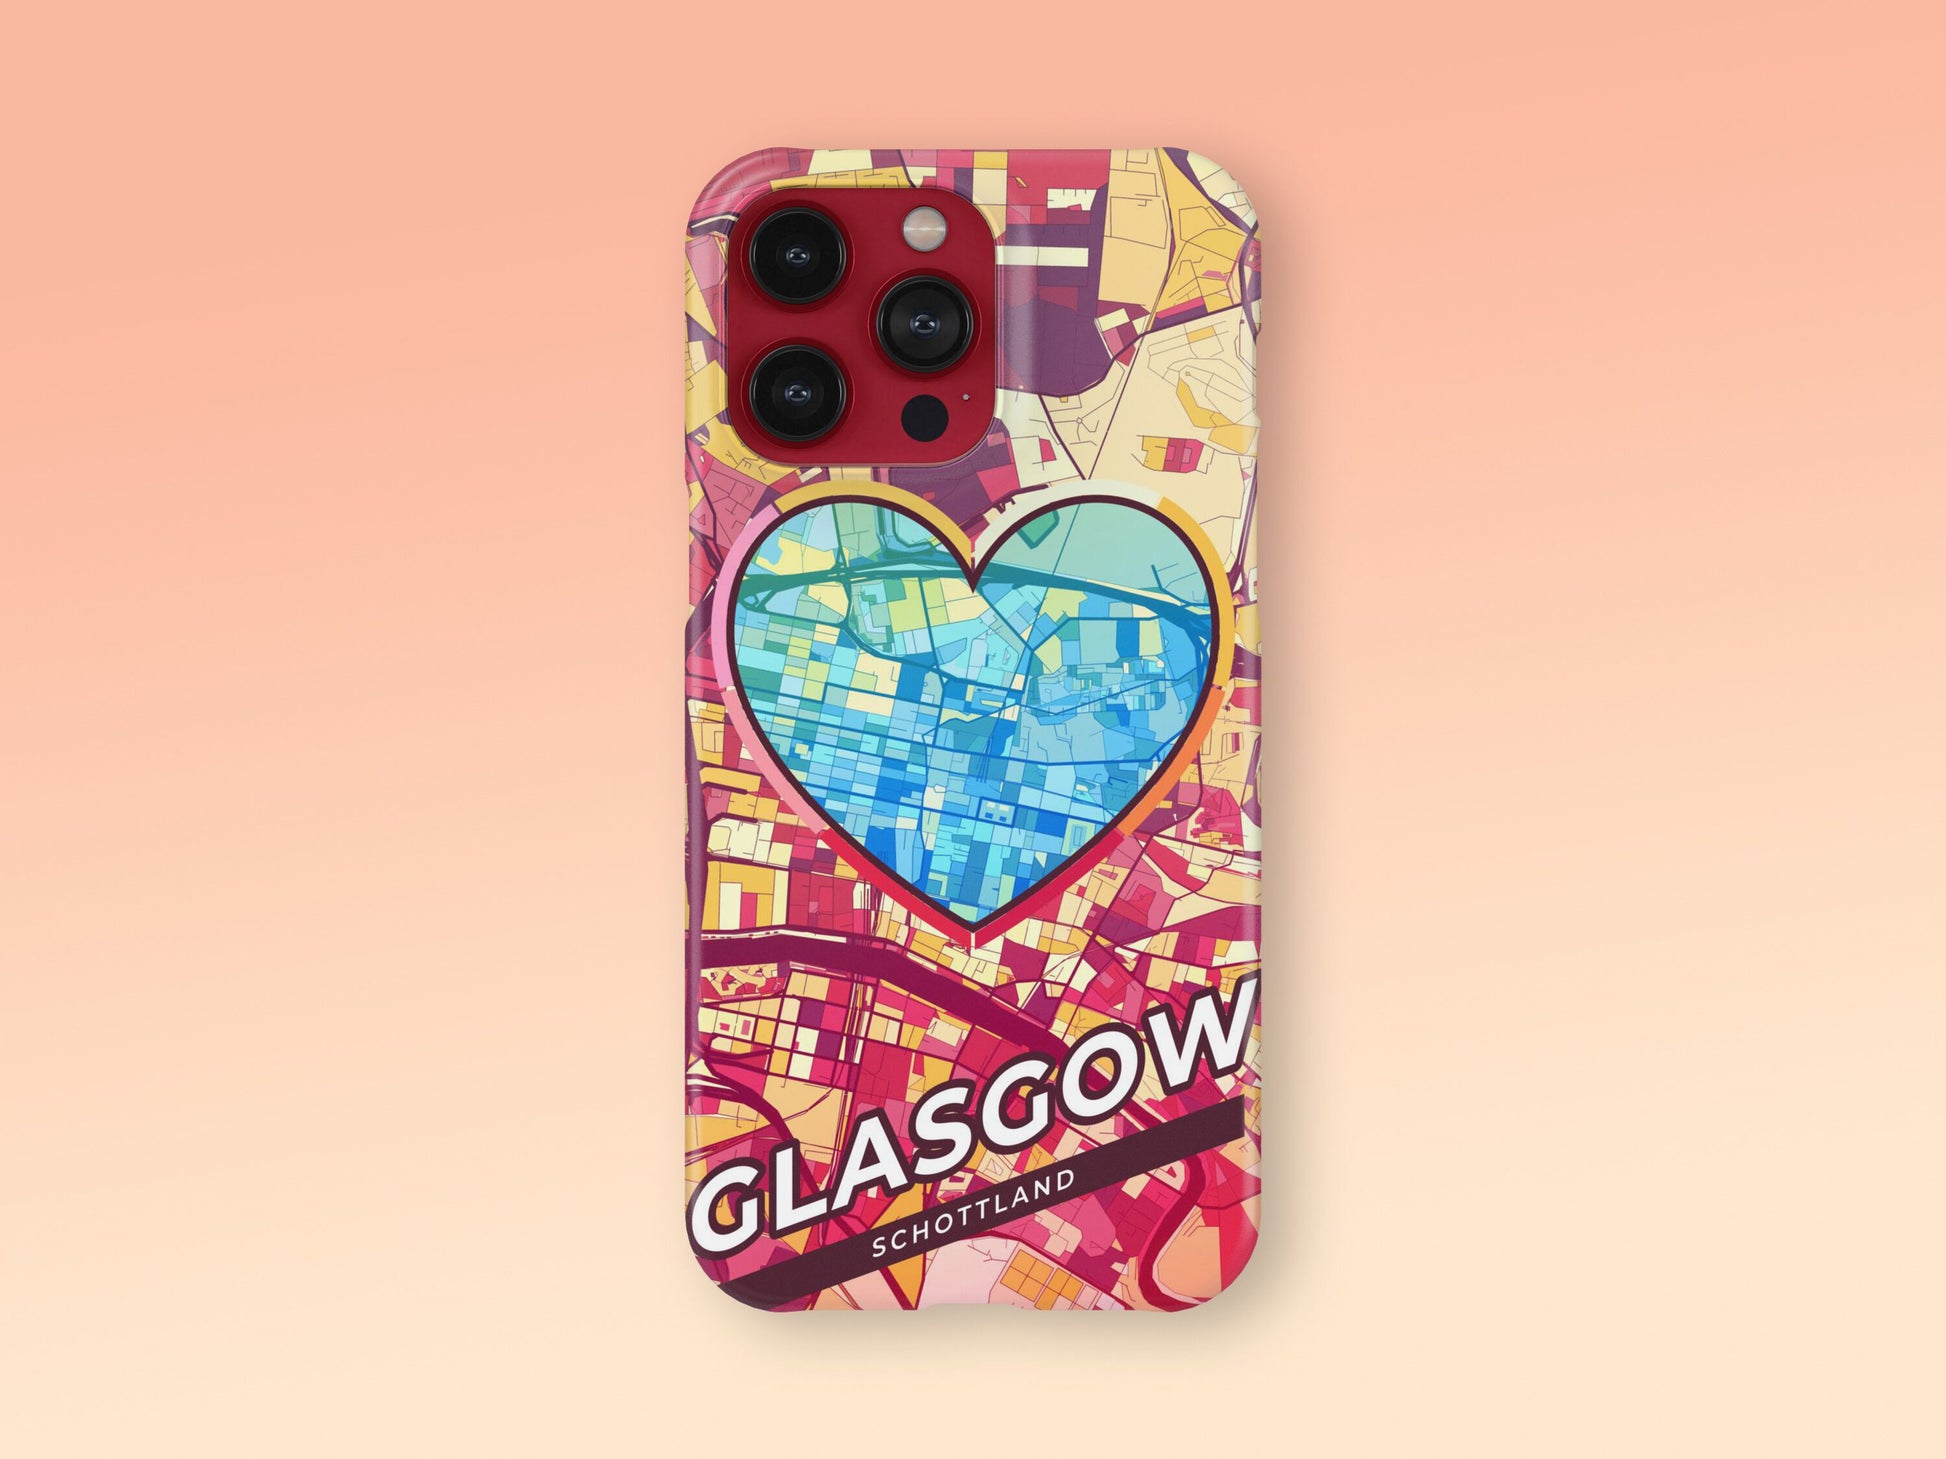 Glasgow Scotland slim phone case with colorful icon. Birthday, wedding or housewarming gift. Couple match cases. 2